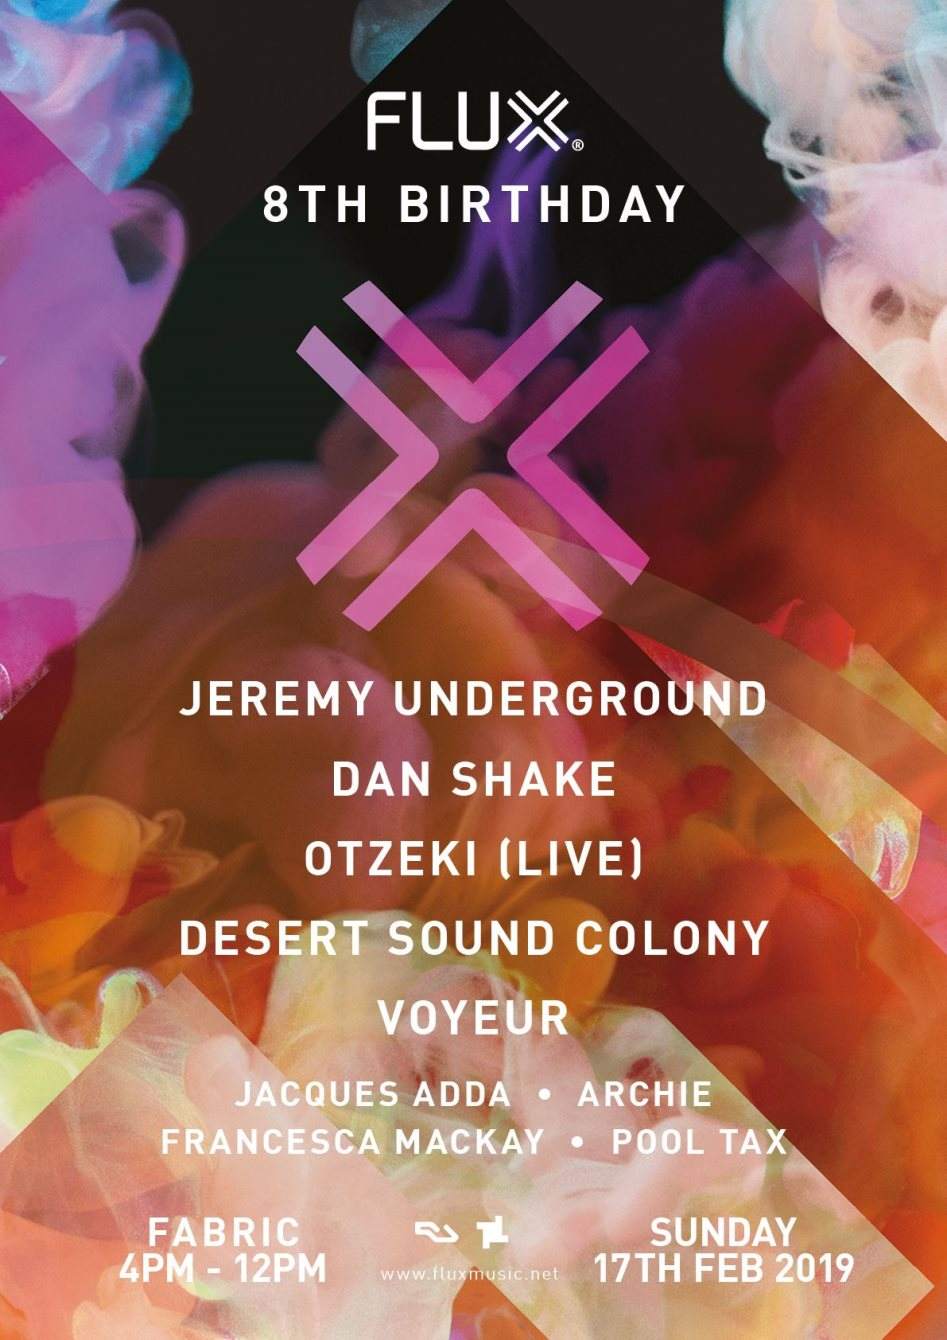 Sundays at fabric: Flux 8th Birthday Day Party - フライヤー裏